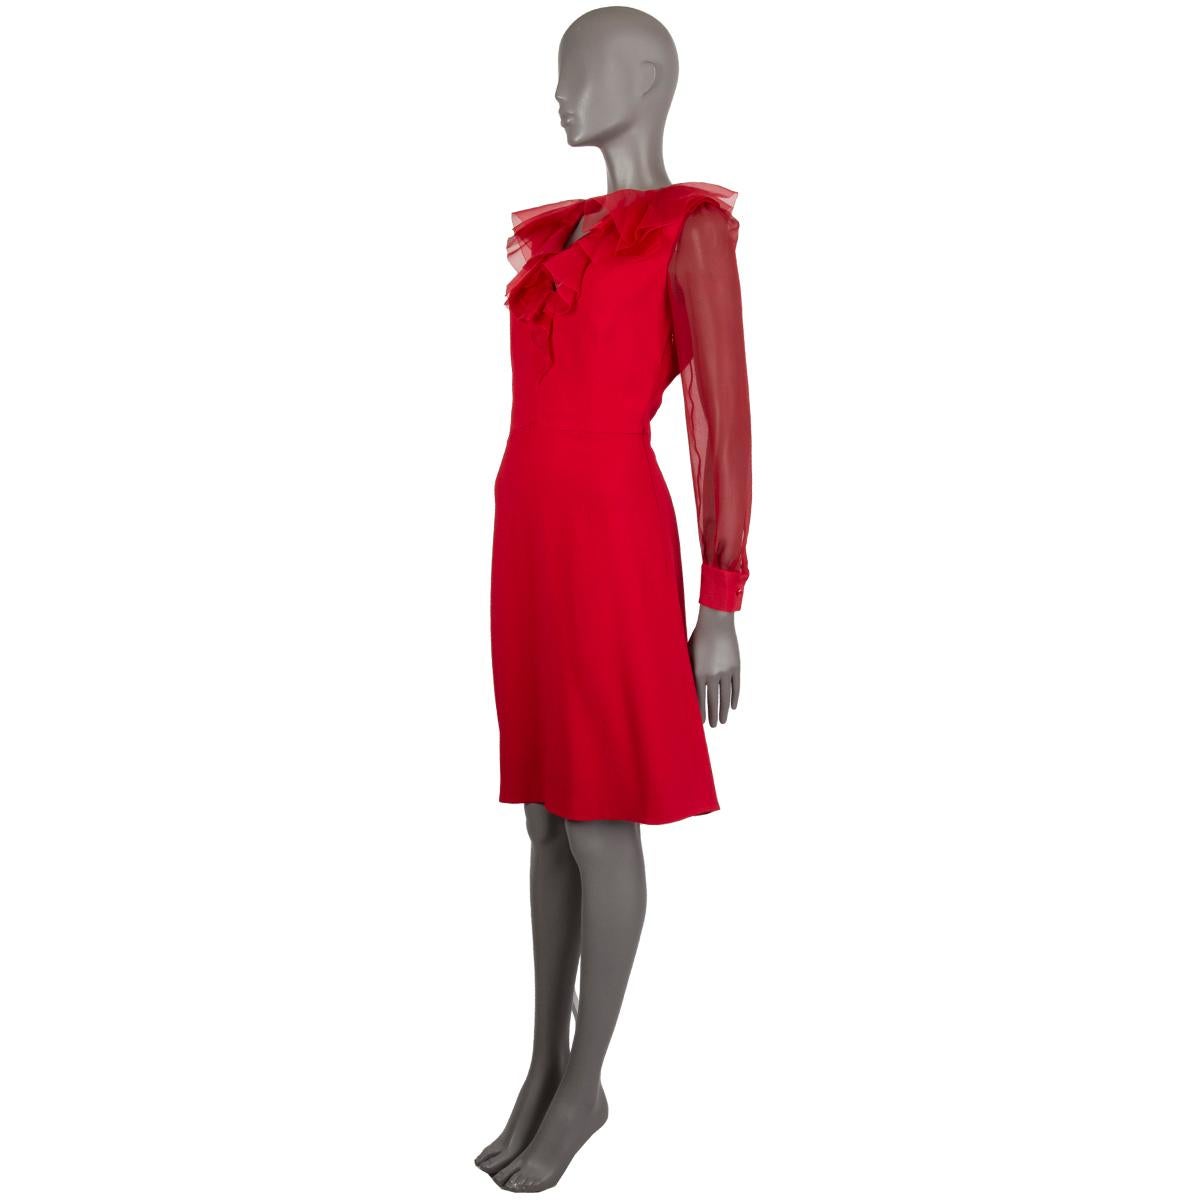 Valentino ruffle-collar dress in red viscose (95%) elastane (5%) with a layered silk ruffle- collar, sheer silk sleeves closes with a button, flared A-line skirt. Closes with a concealed zipper on the left side. Lined in red silk (100%). Has been